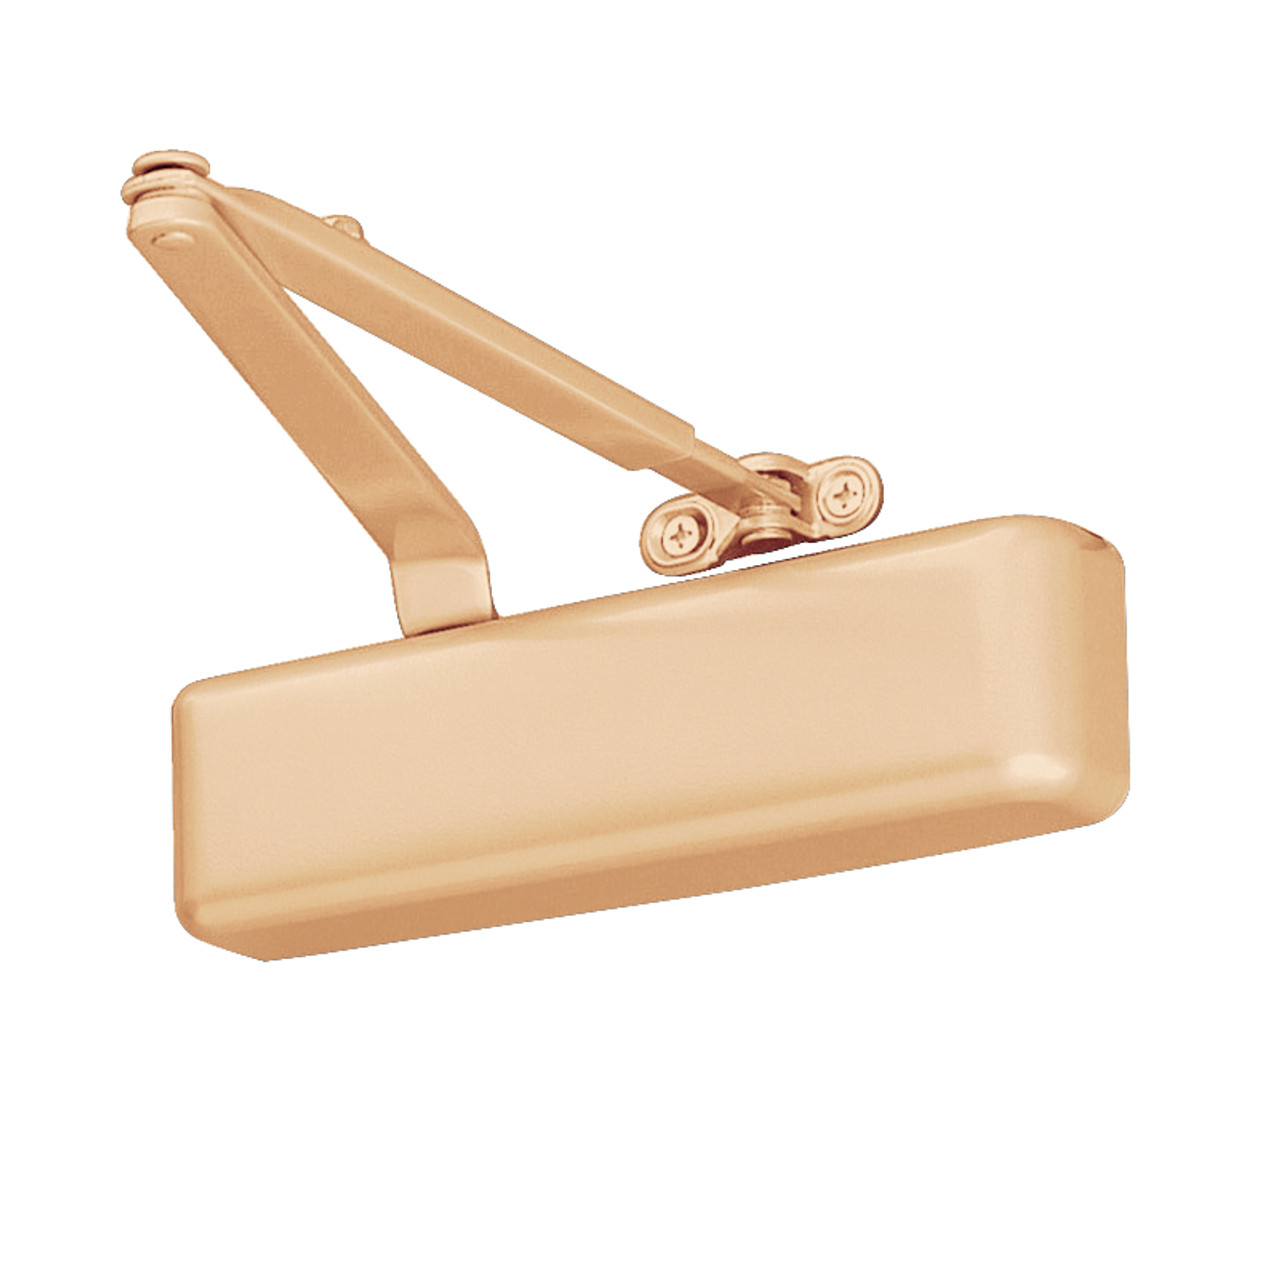 4031-Hw-PA-US10 LCN Door Closer Hold Open Arm with Parallel Arm Shoe in Satin Bronze Finish